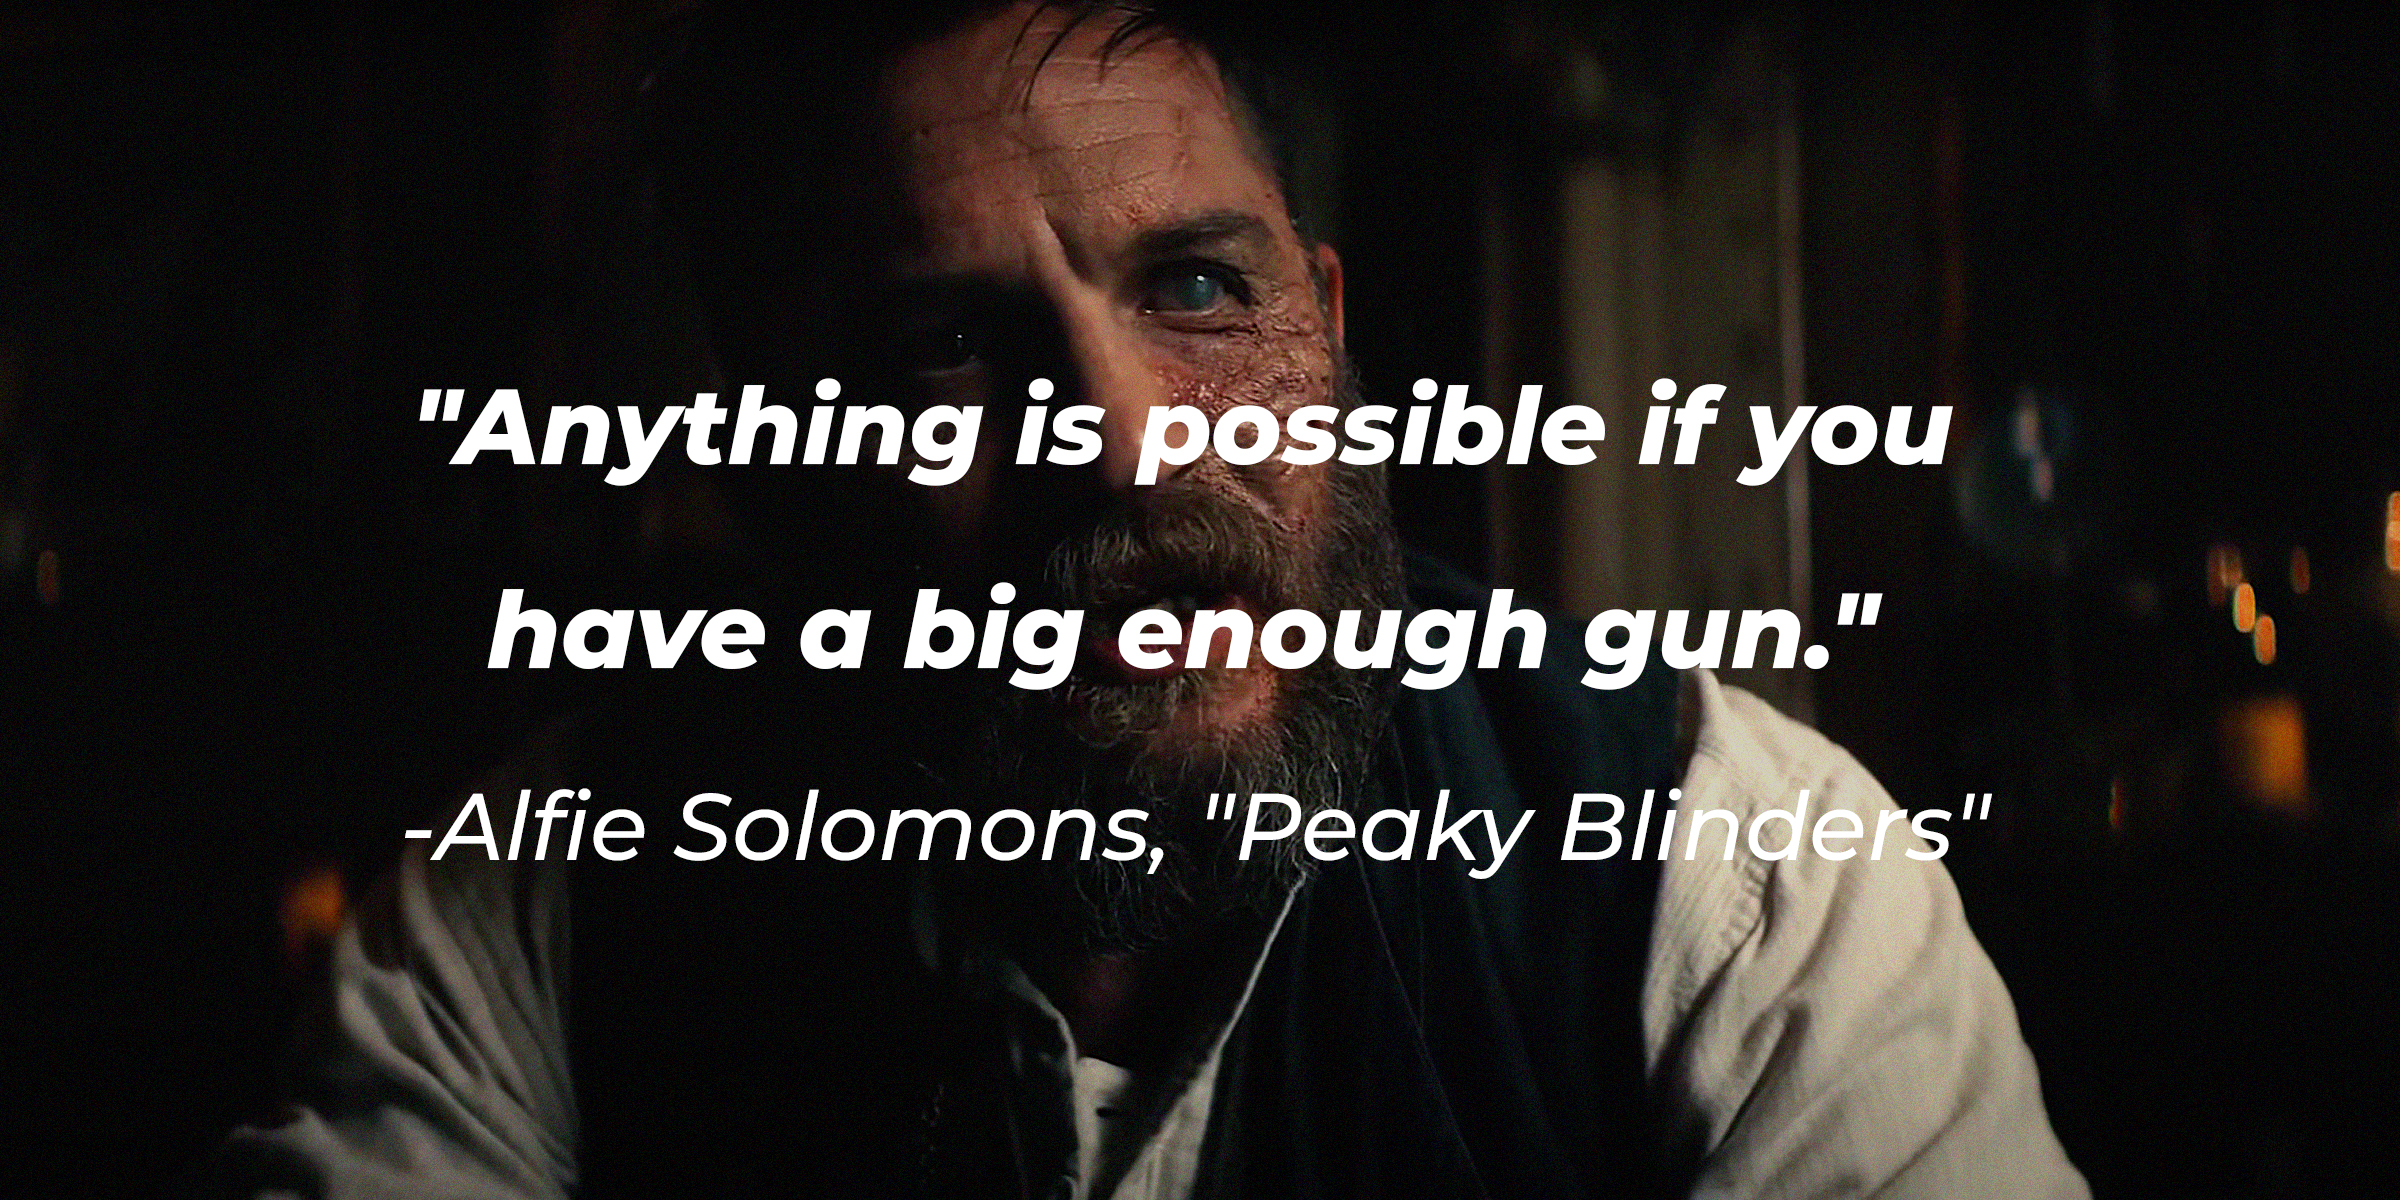 Alfie Solomons, with his quote: "Anything is possible if you have a big enough gun." | Source: facebook.com/PeakyBlinders